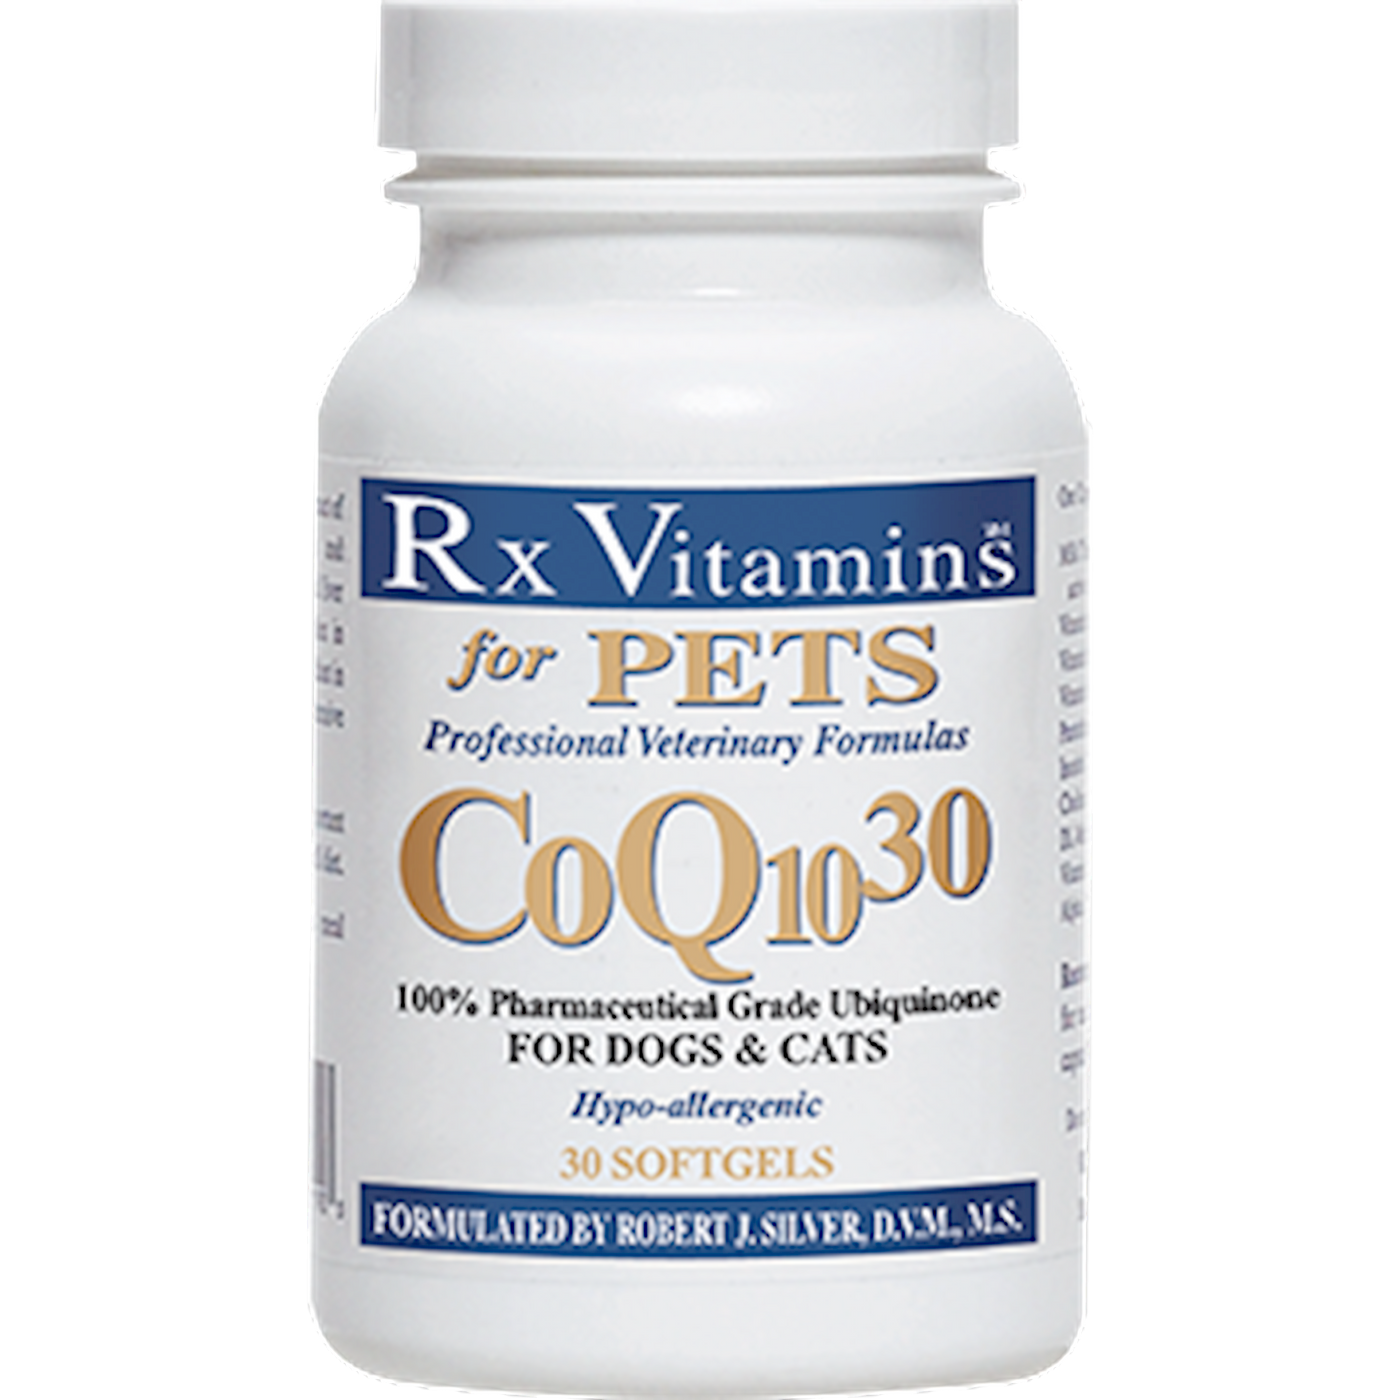 CoQ10 30 for Dogs & Cats 30 gels Curated Wellness